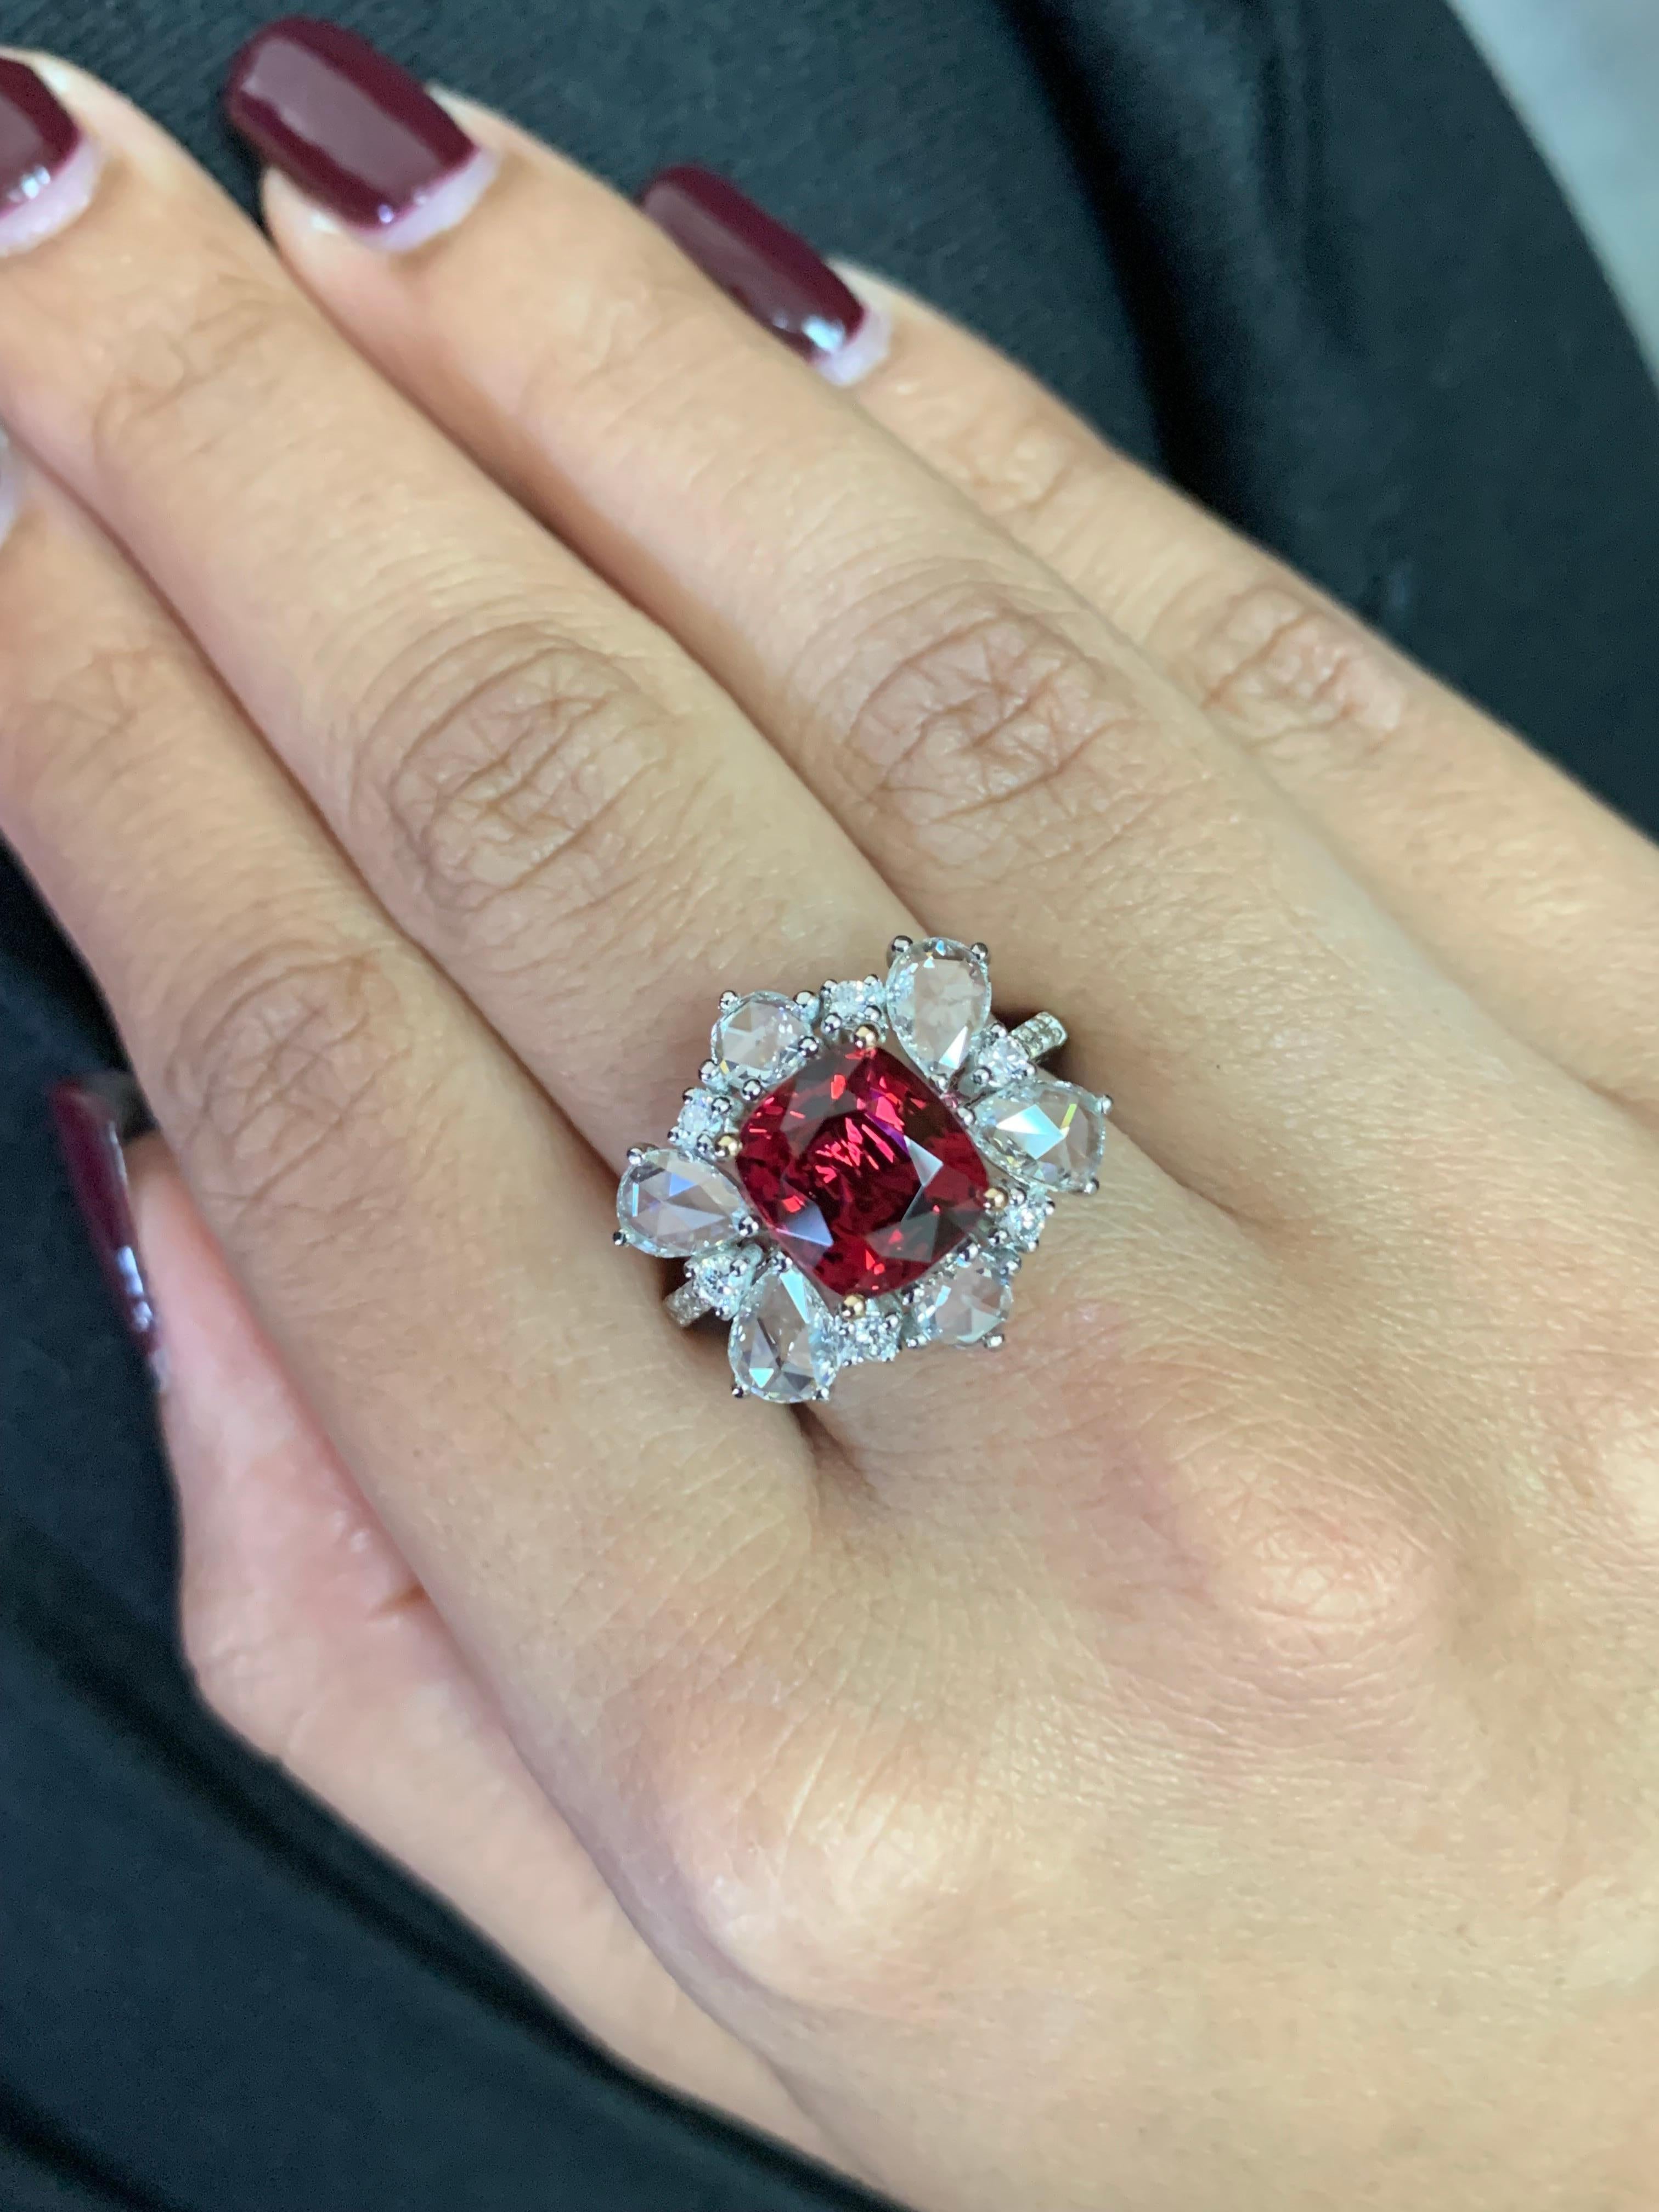 Spinels are a fascinating gemstone with a long history amongst royal jewelry. Burmese red spinels in particular hold great appreciation due to their rich red color often being mistaken for rubies. Sunita Nahata presents an exclusive collection of